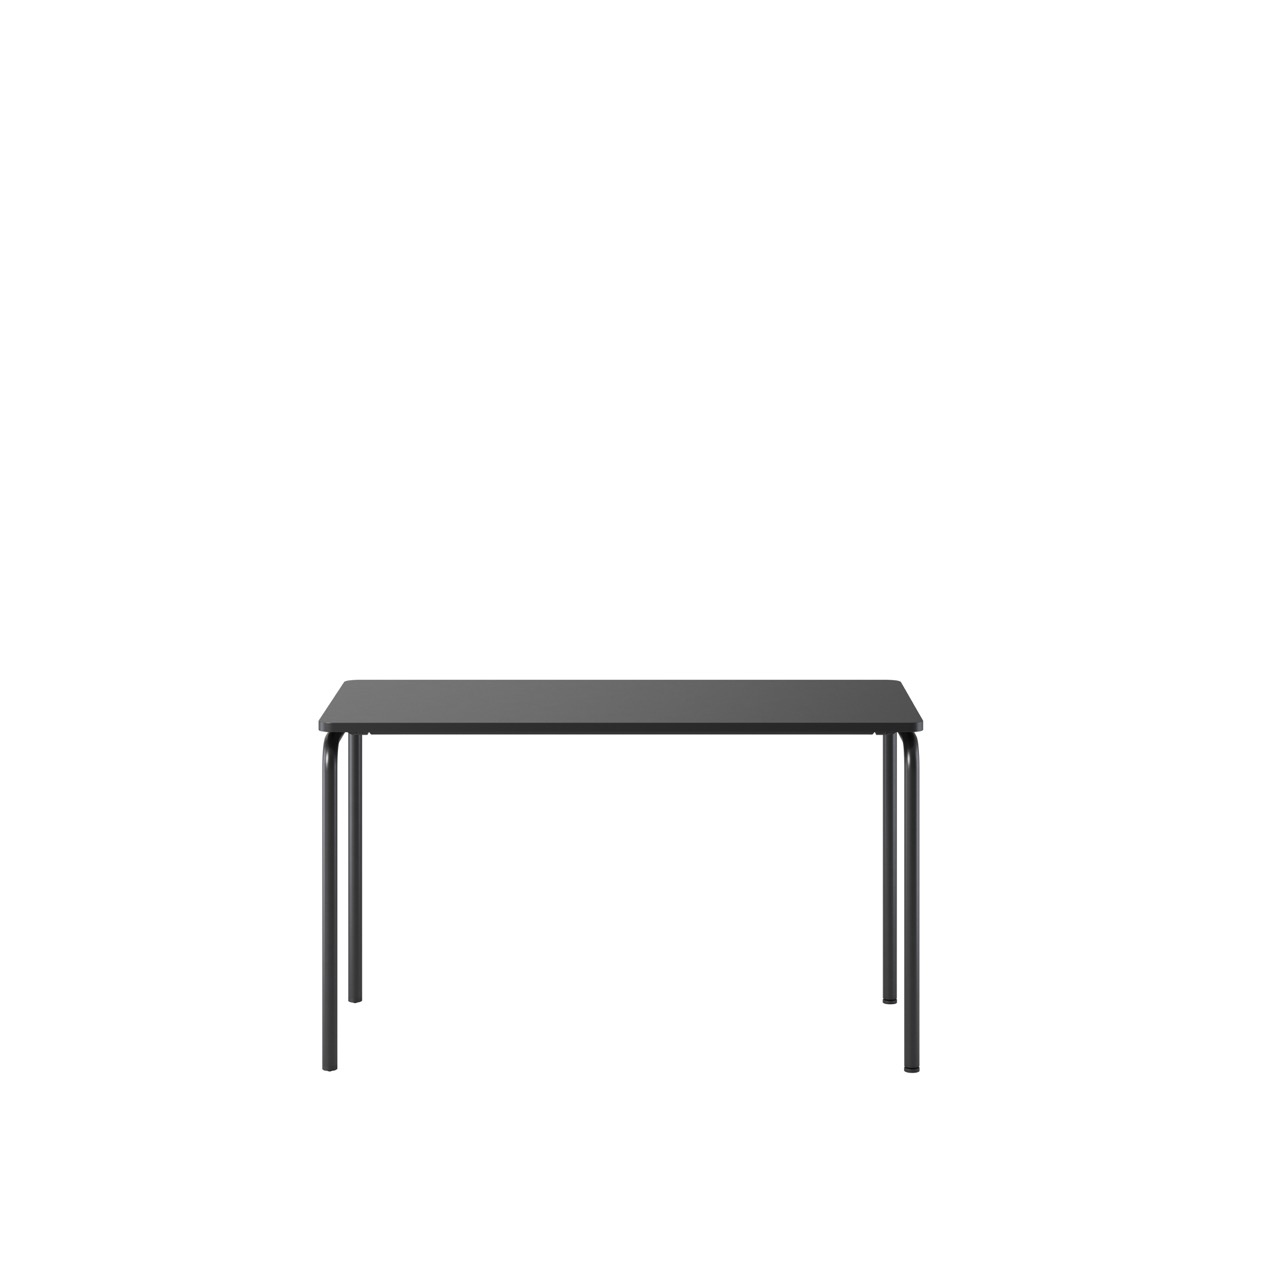 OCEE&FOUR - Tables - FourReal 74 - 128 x 64 - Straight - Packshot Image 1 Large